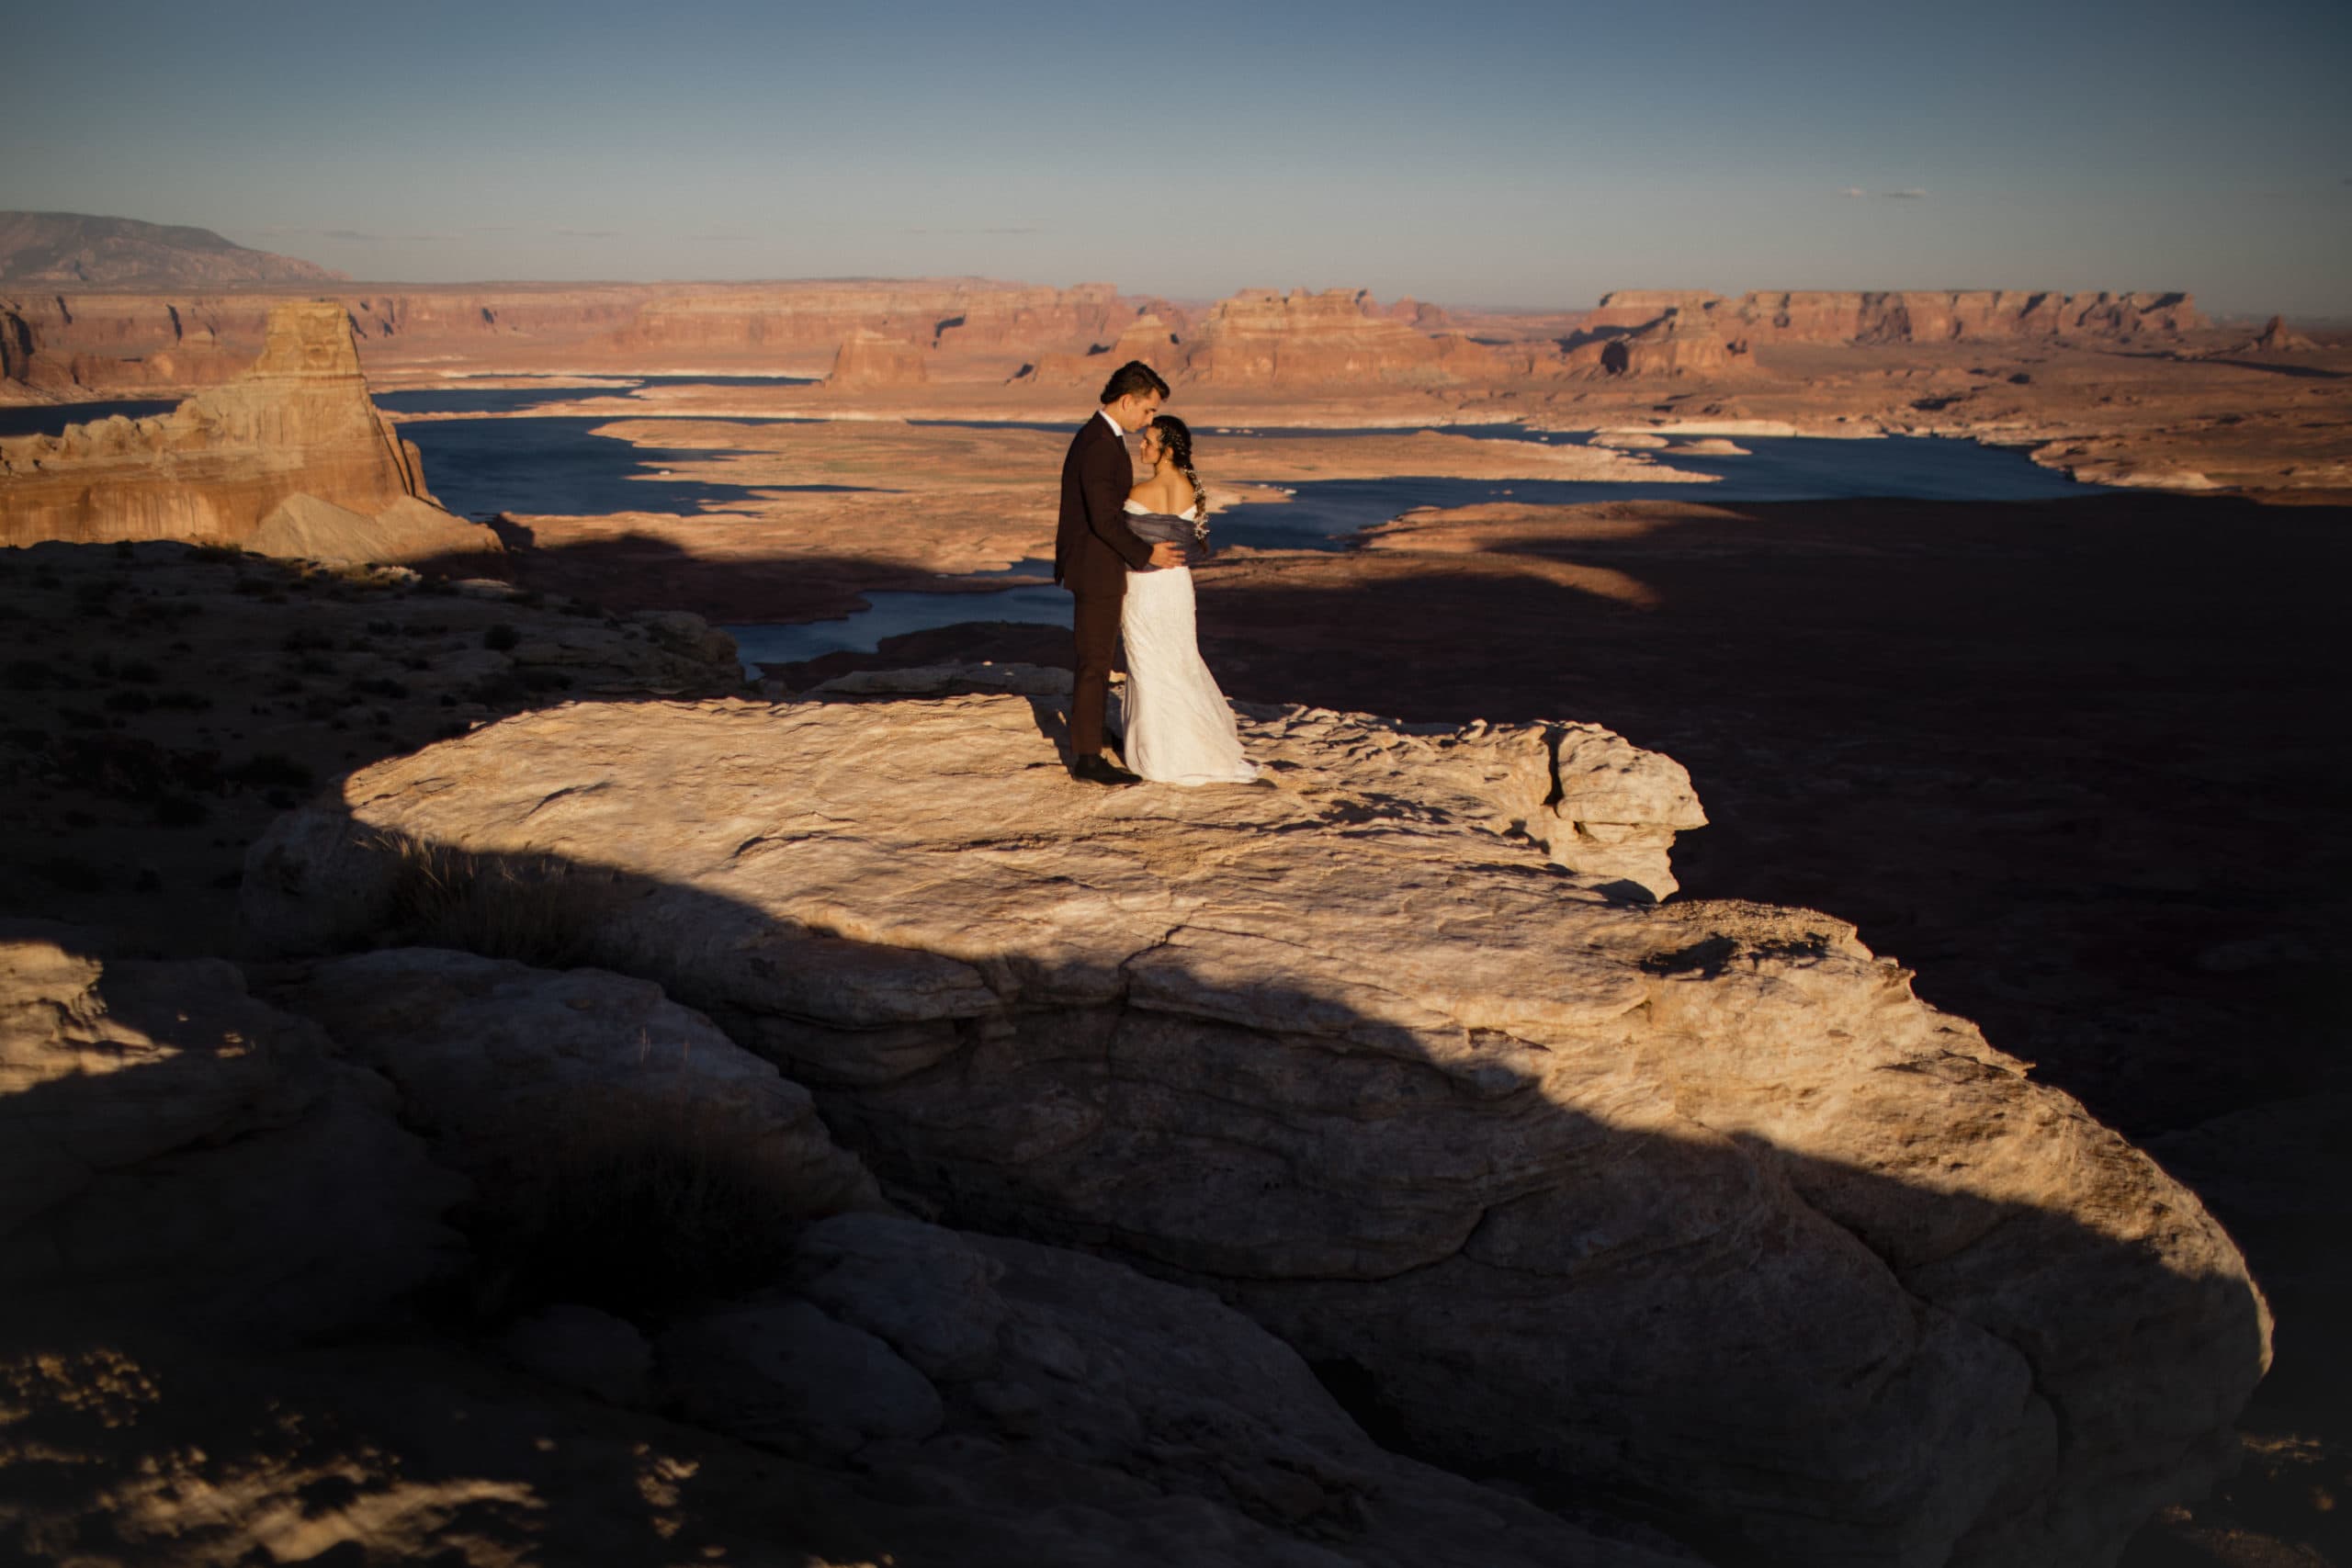 A Lake Powell wedding can be extremely romatic amoungst the red cliffs and turquoise water.